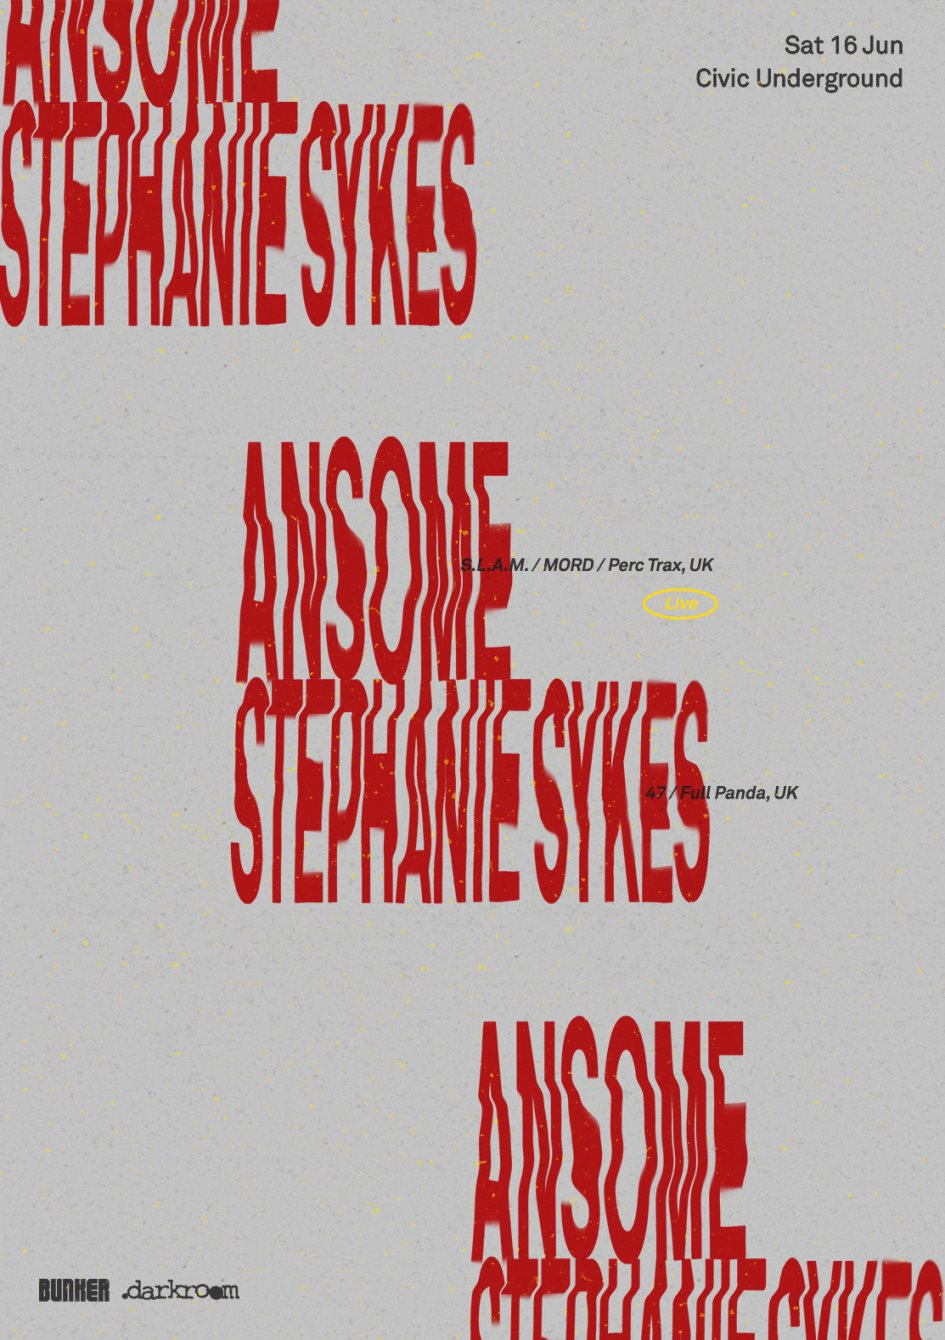 Bunker & .Darkroom present Ansome (Live) & Stephanie Sykes - Flyer front